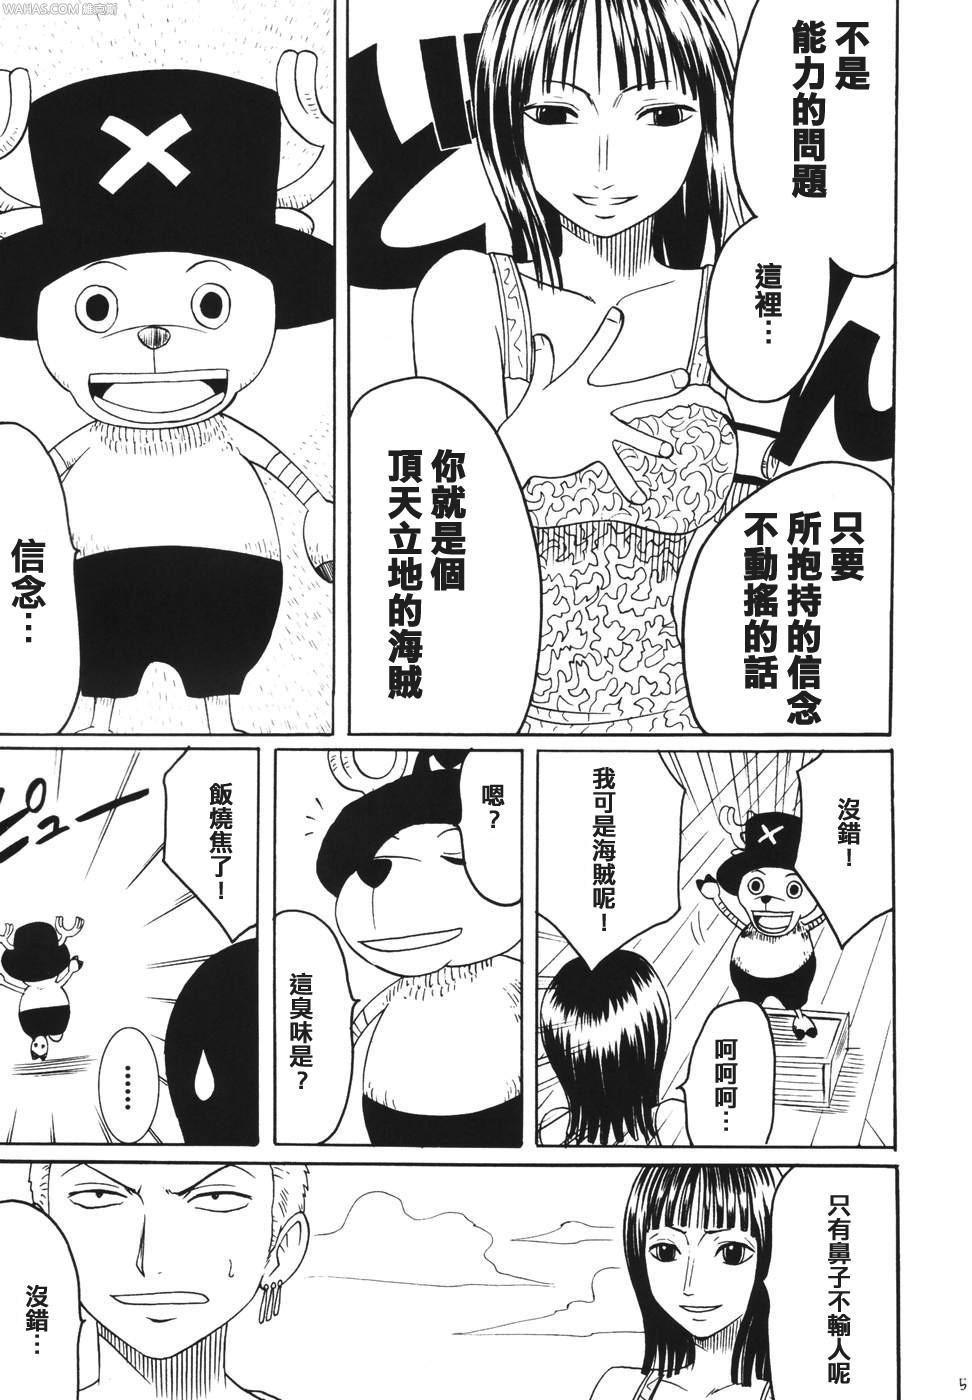 Masterbation Dancing Animation Run - One piece Gorgeous - Page 4